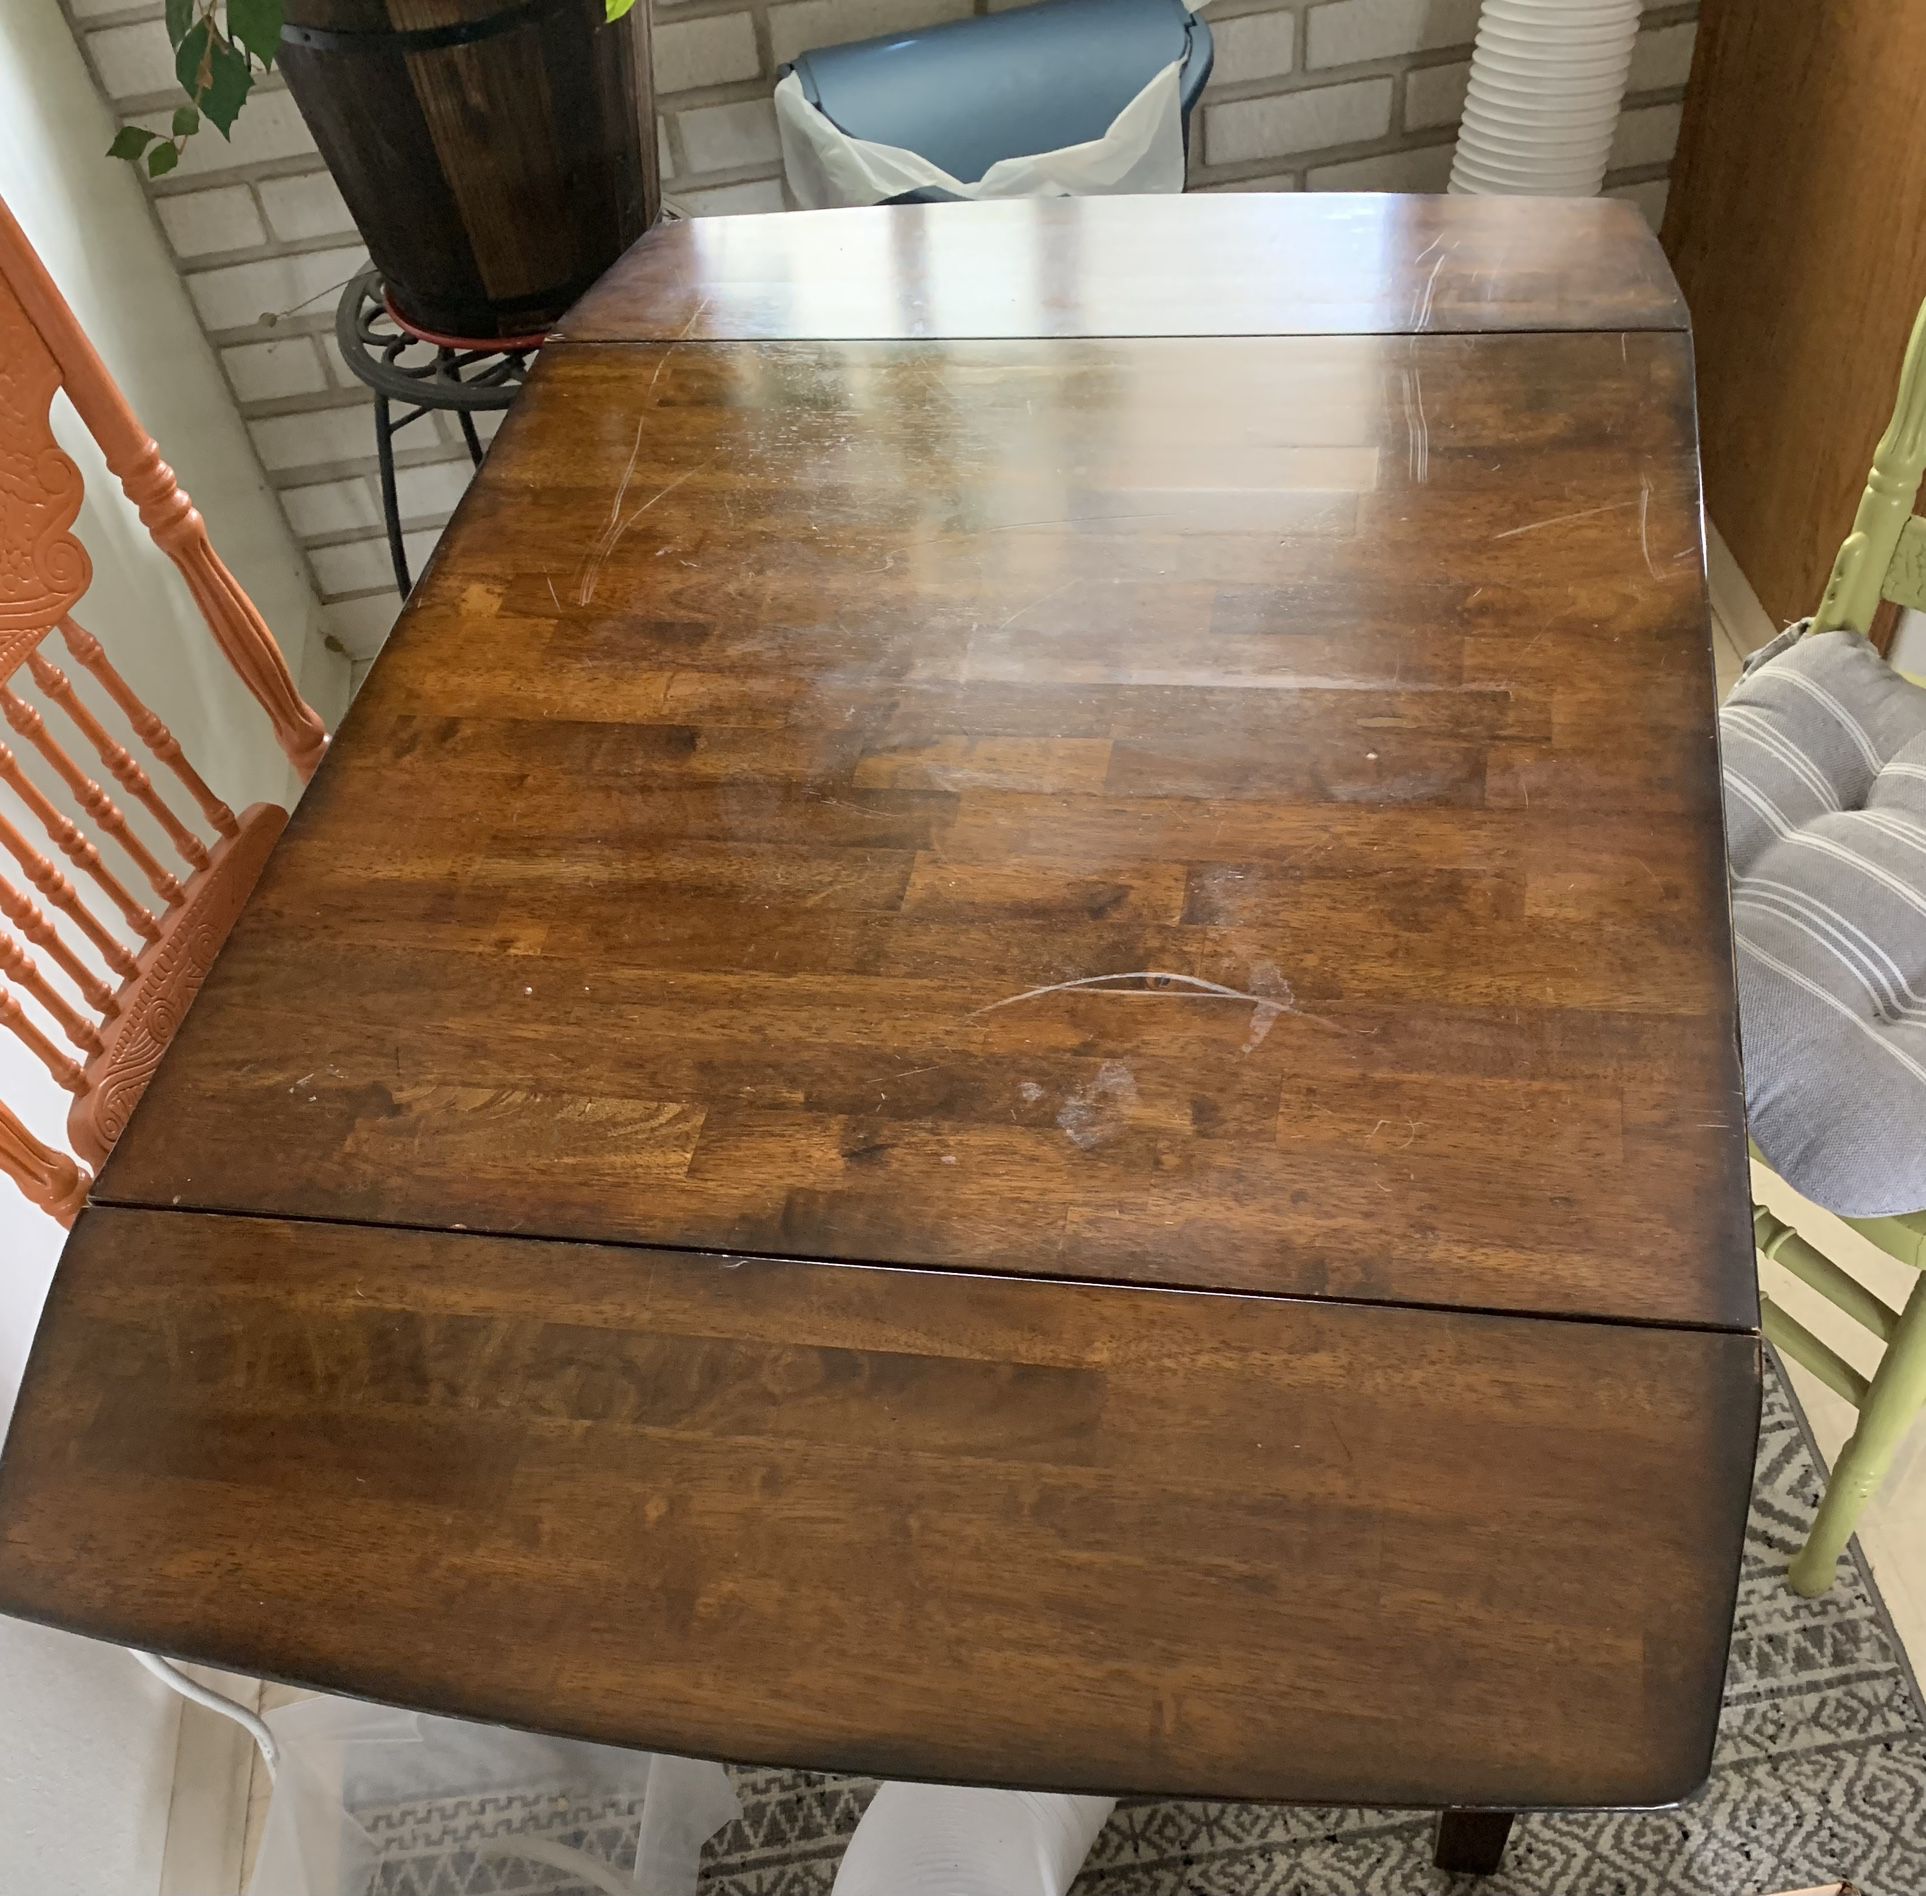 Awesome Antique Table For Sale